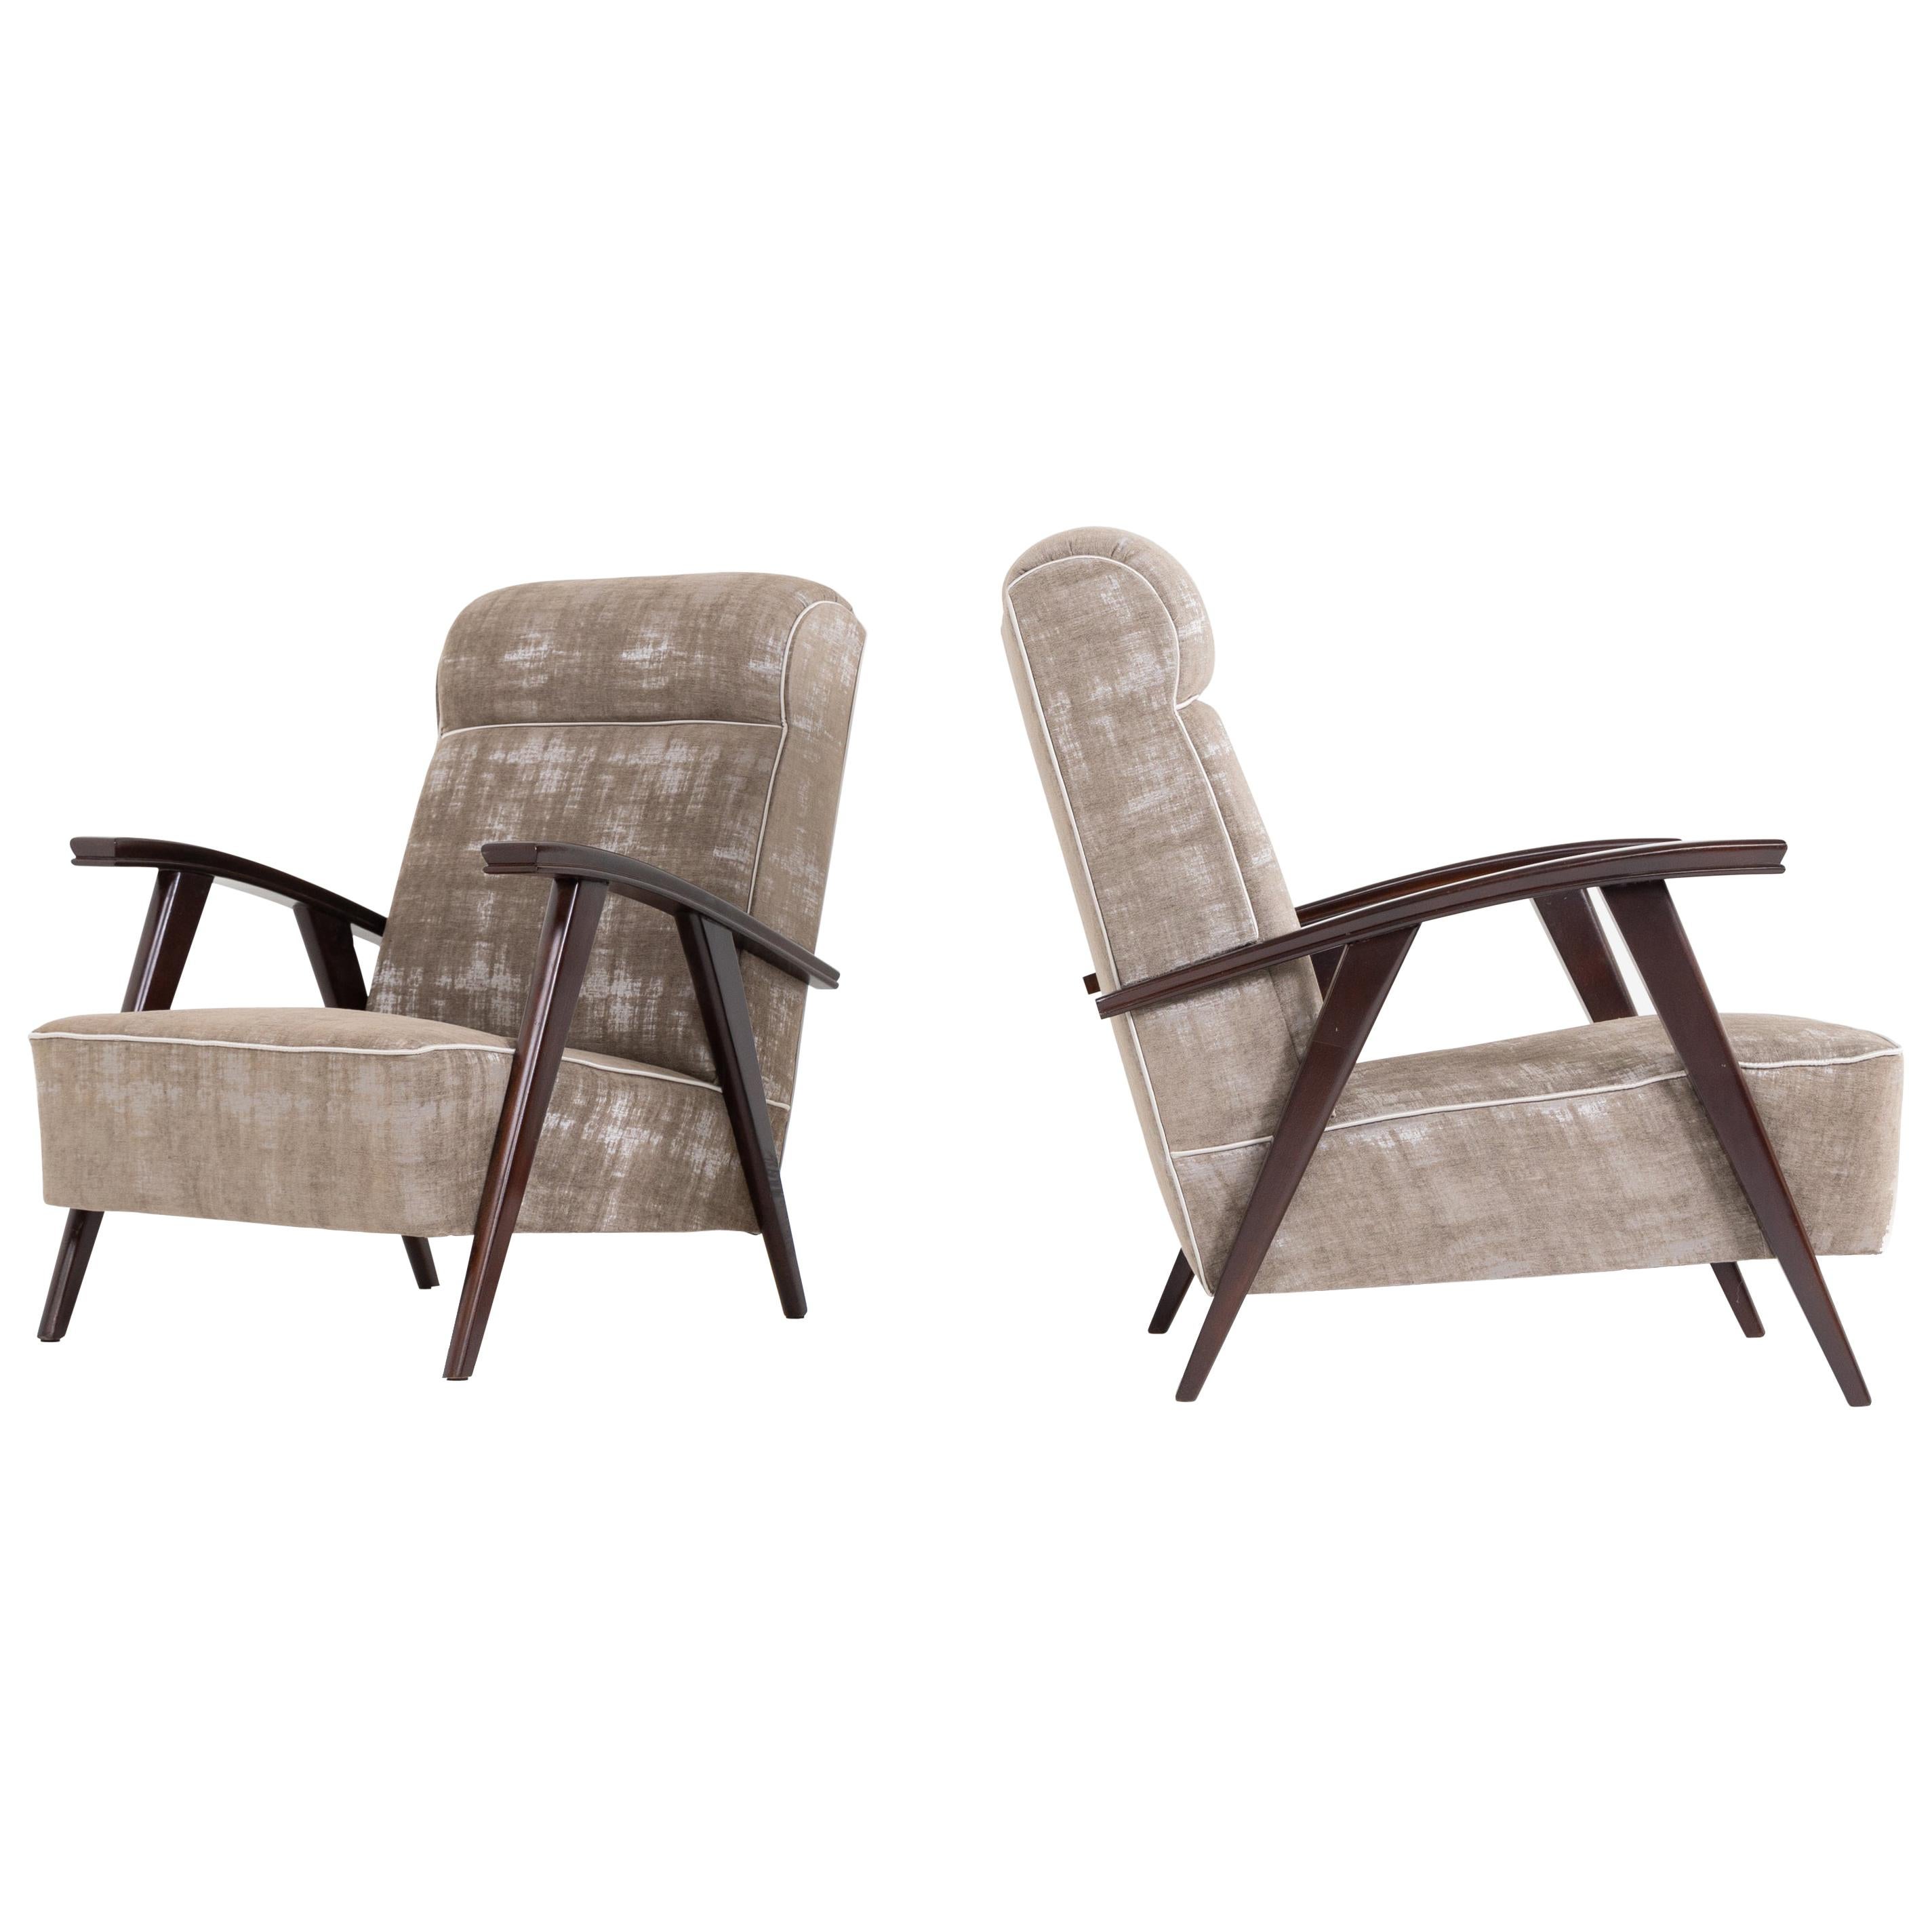 Pair of Modernist Armchairs Attributed to Jacques Adnet